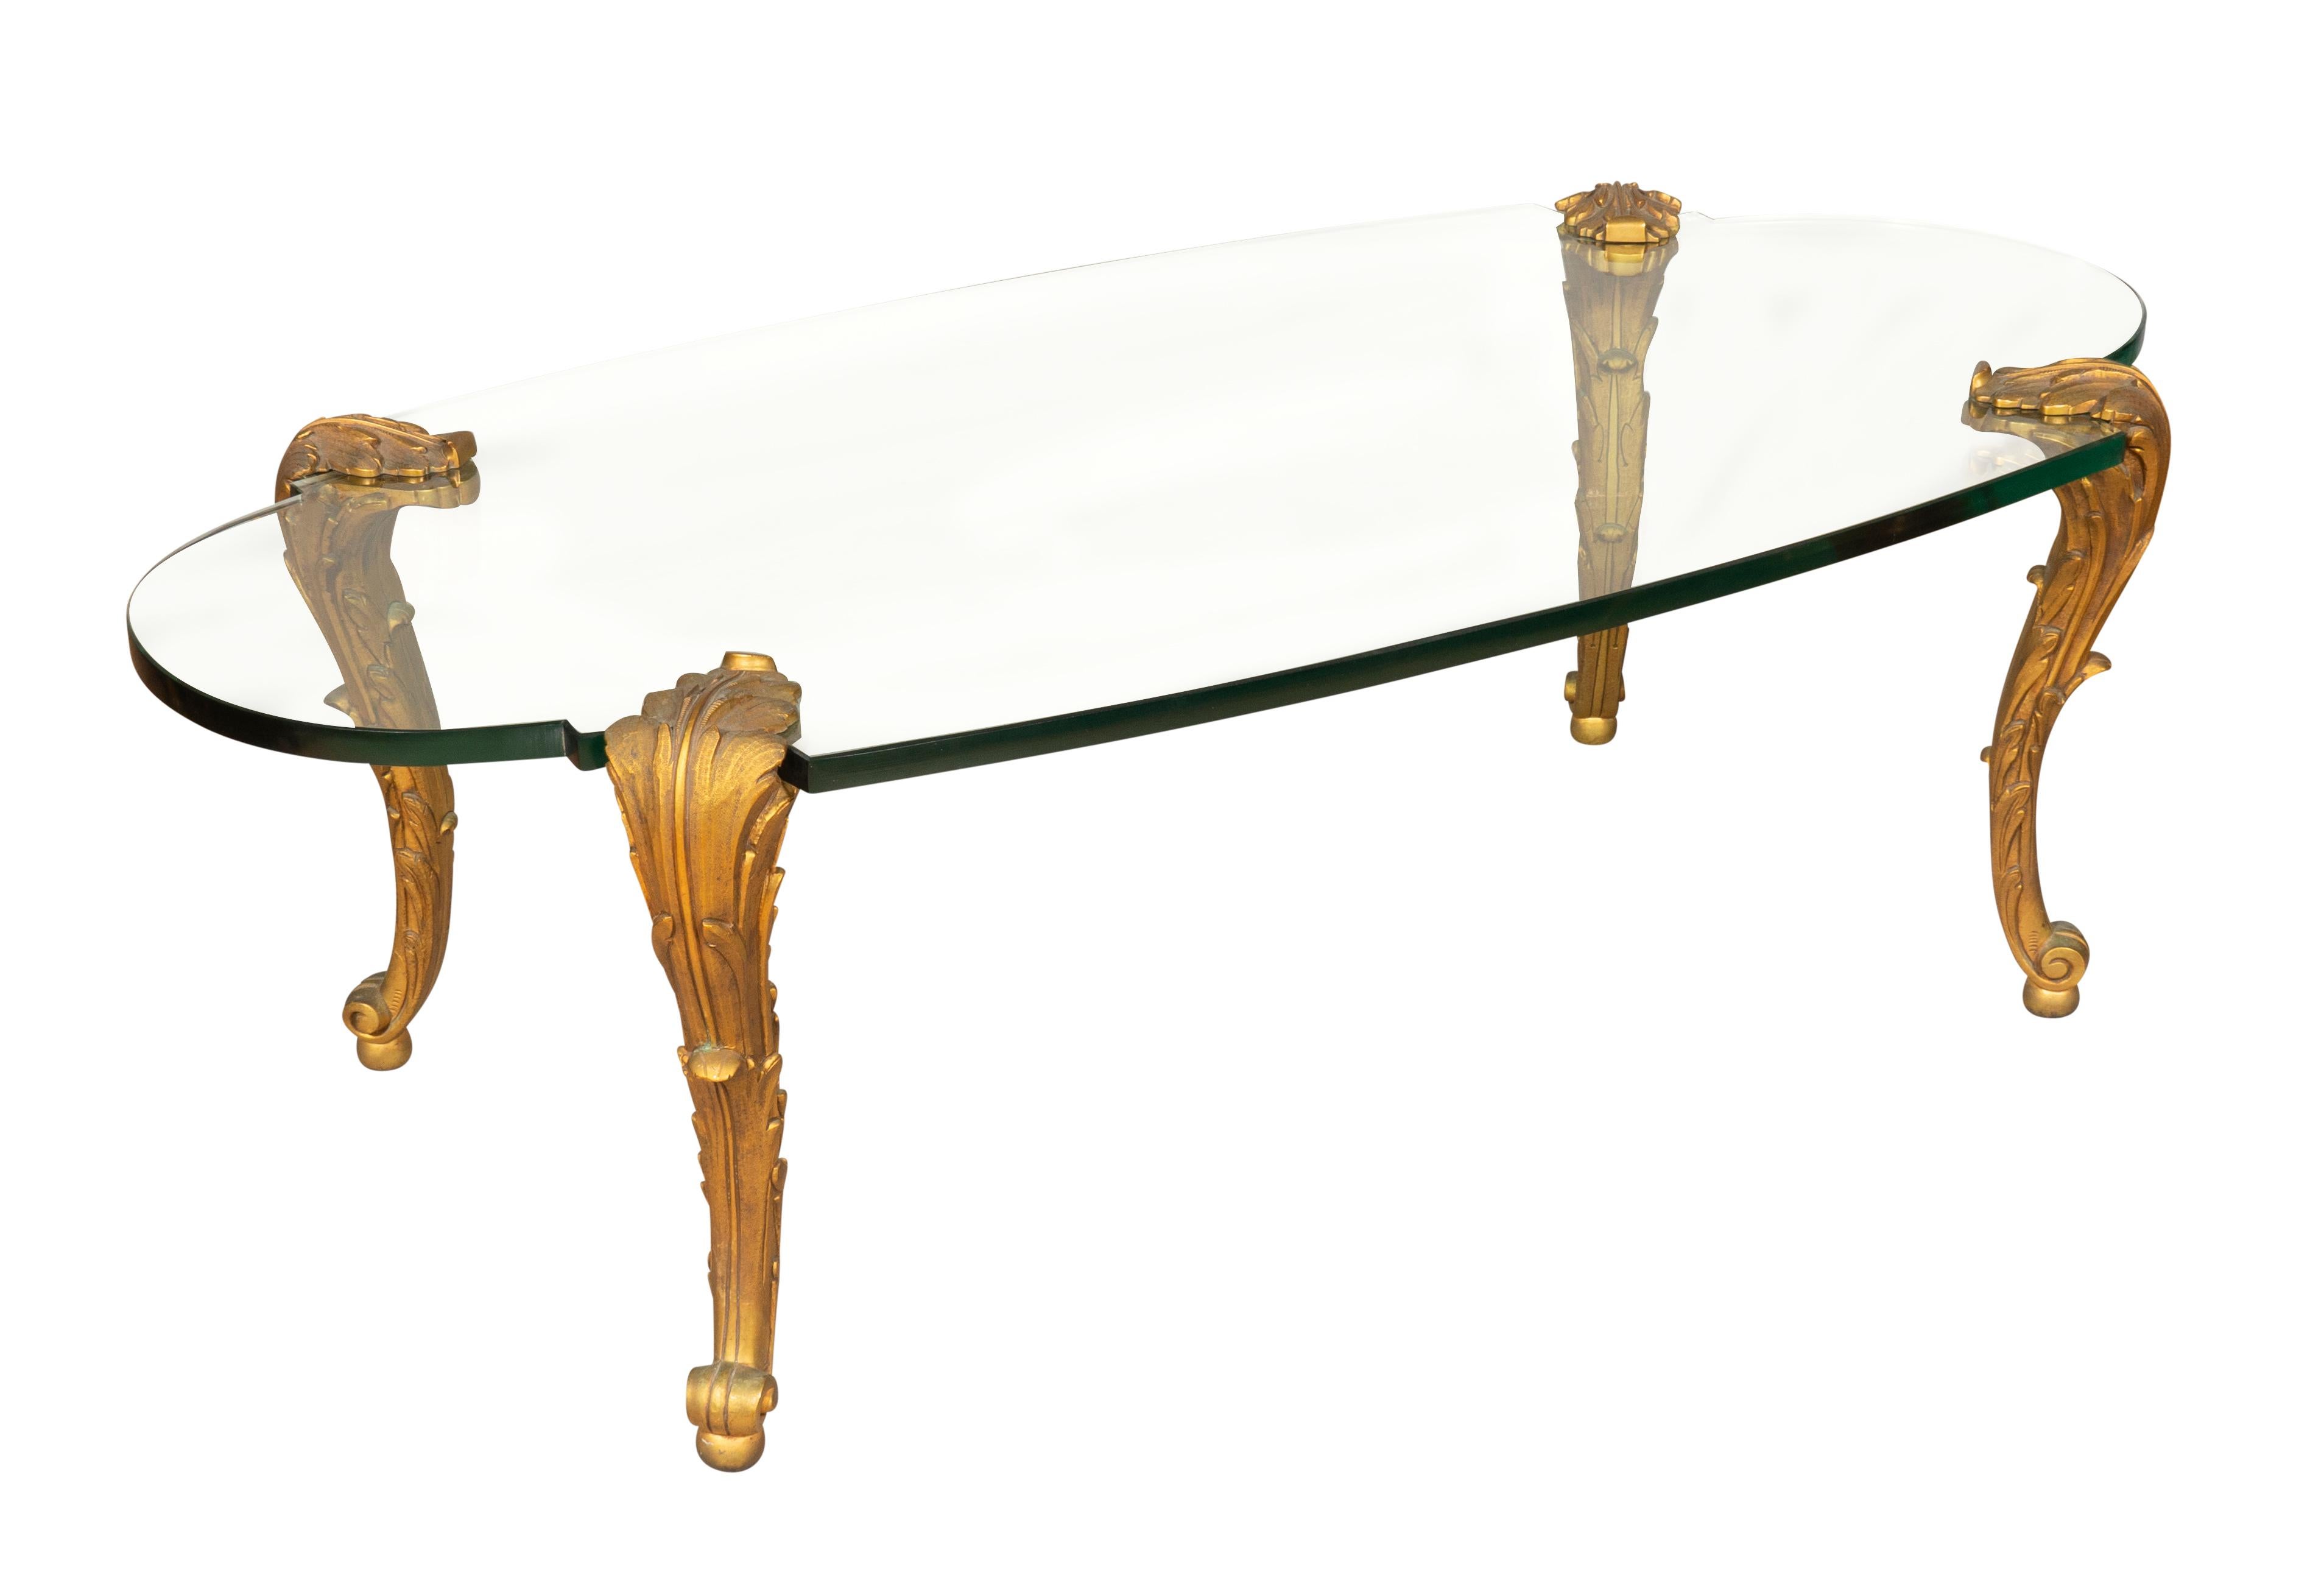 Oval shaped thick glass top supported on gilt bronze cabriole legs. Legs detach for transport. Signed P.E Guerin on underside of feet.